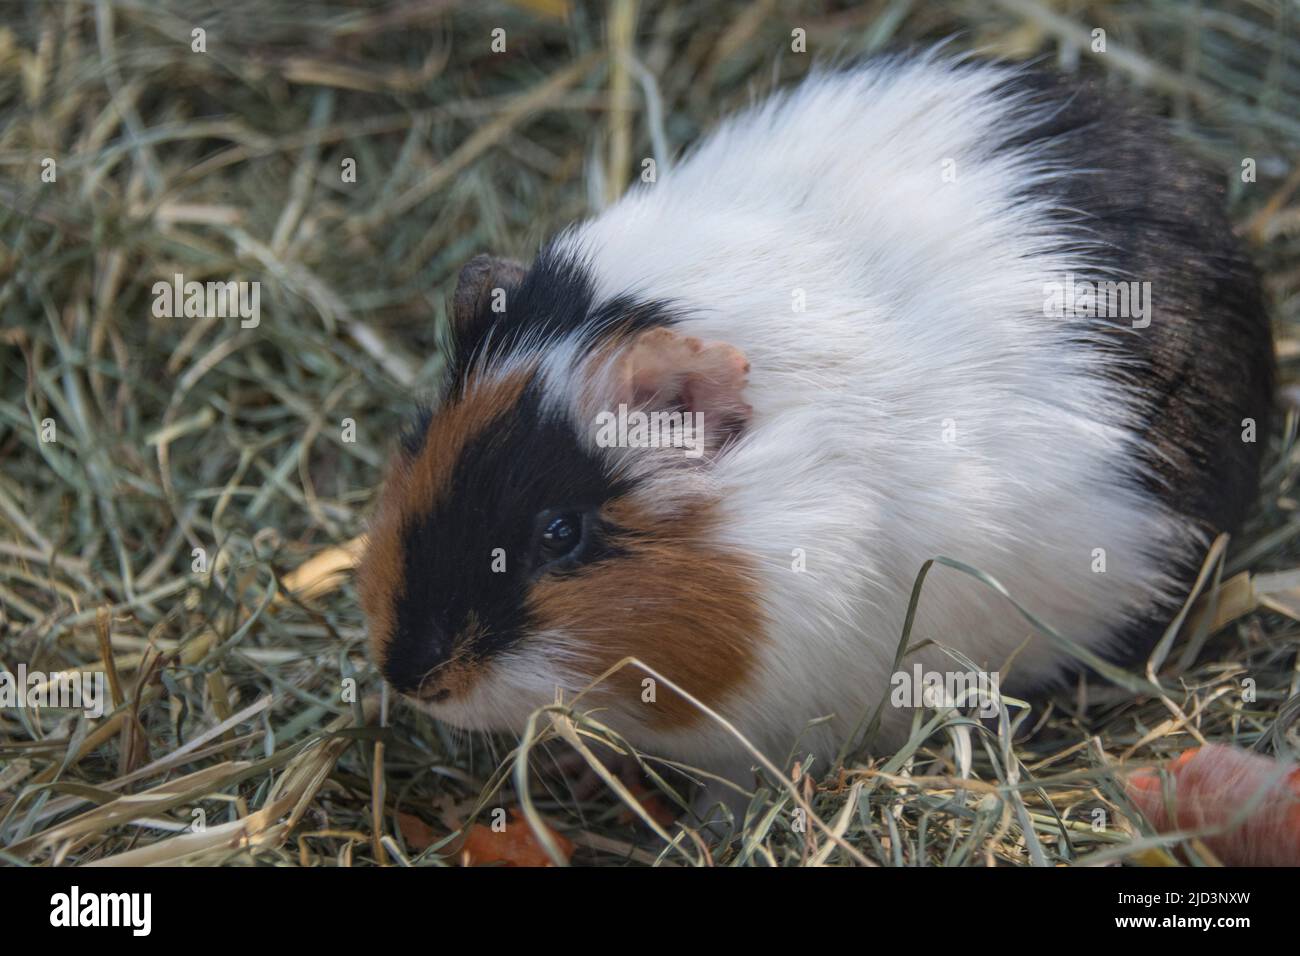 Near view of the small tier, Cavia porcellus, looking at the camera Stock Photo